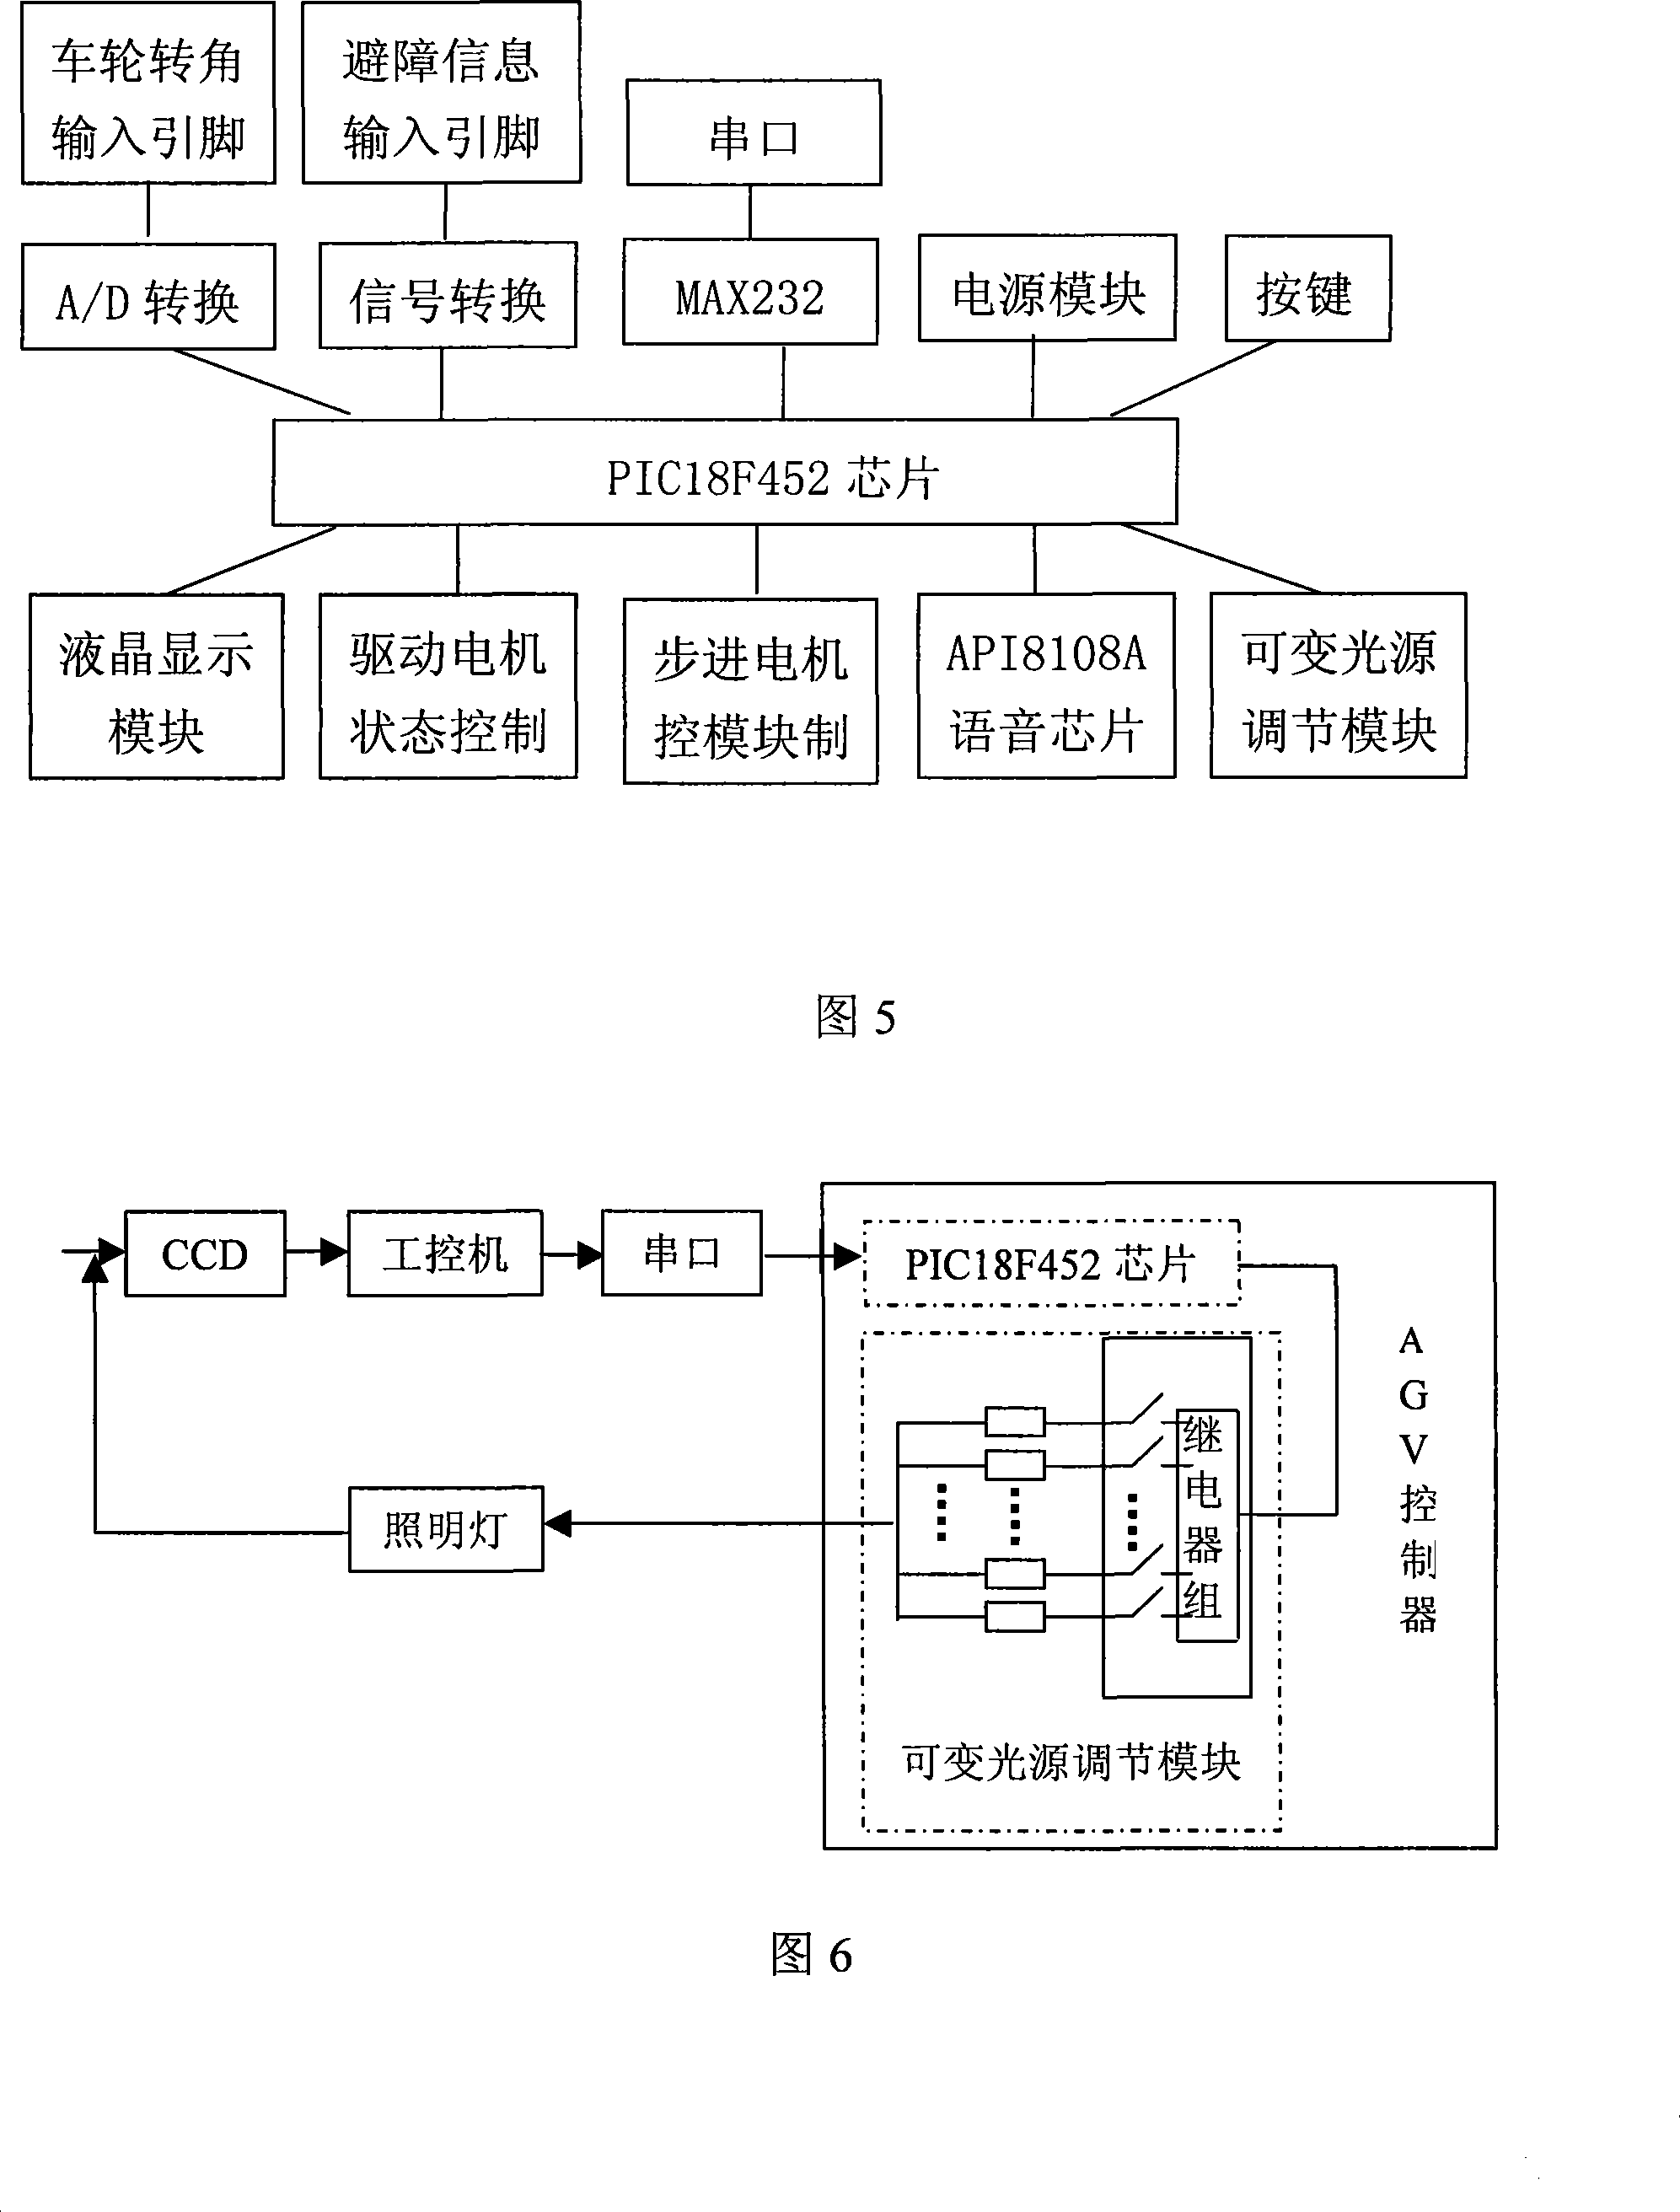 Automatic guidance system based on radio frequency identification tag and vision and method thereof